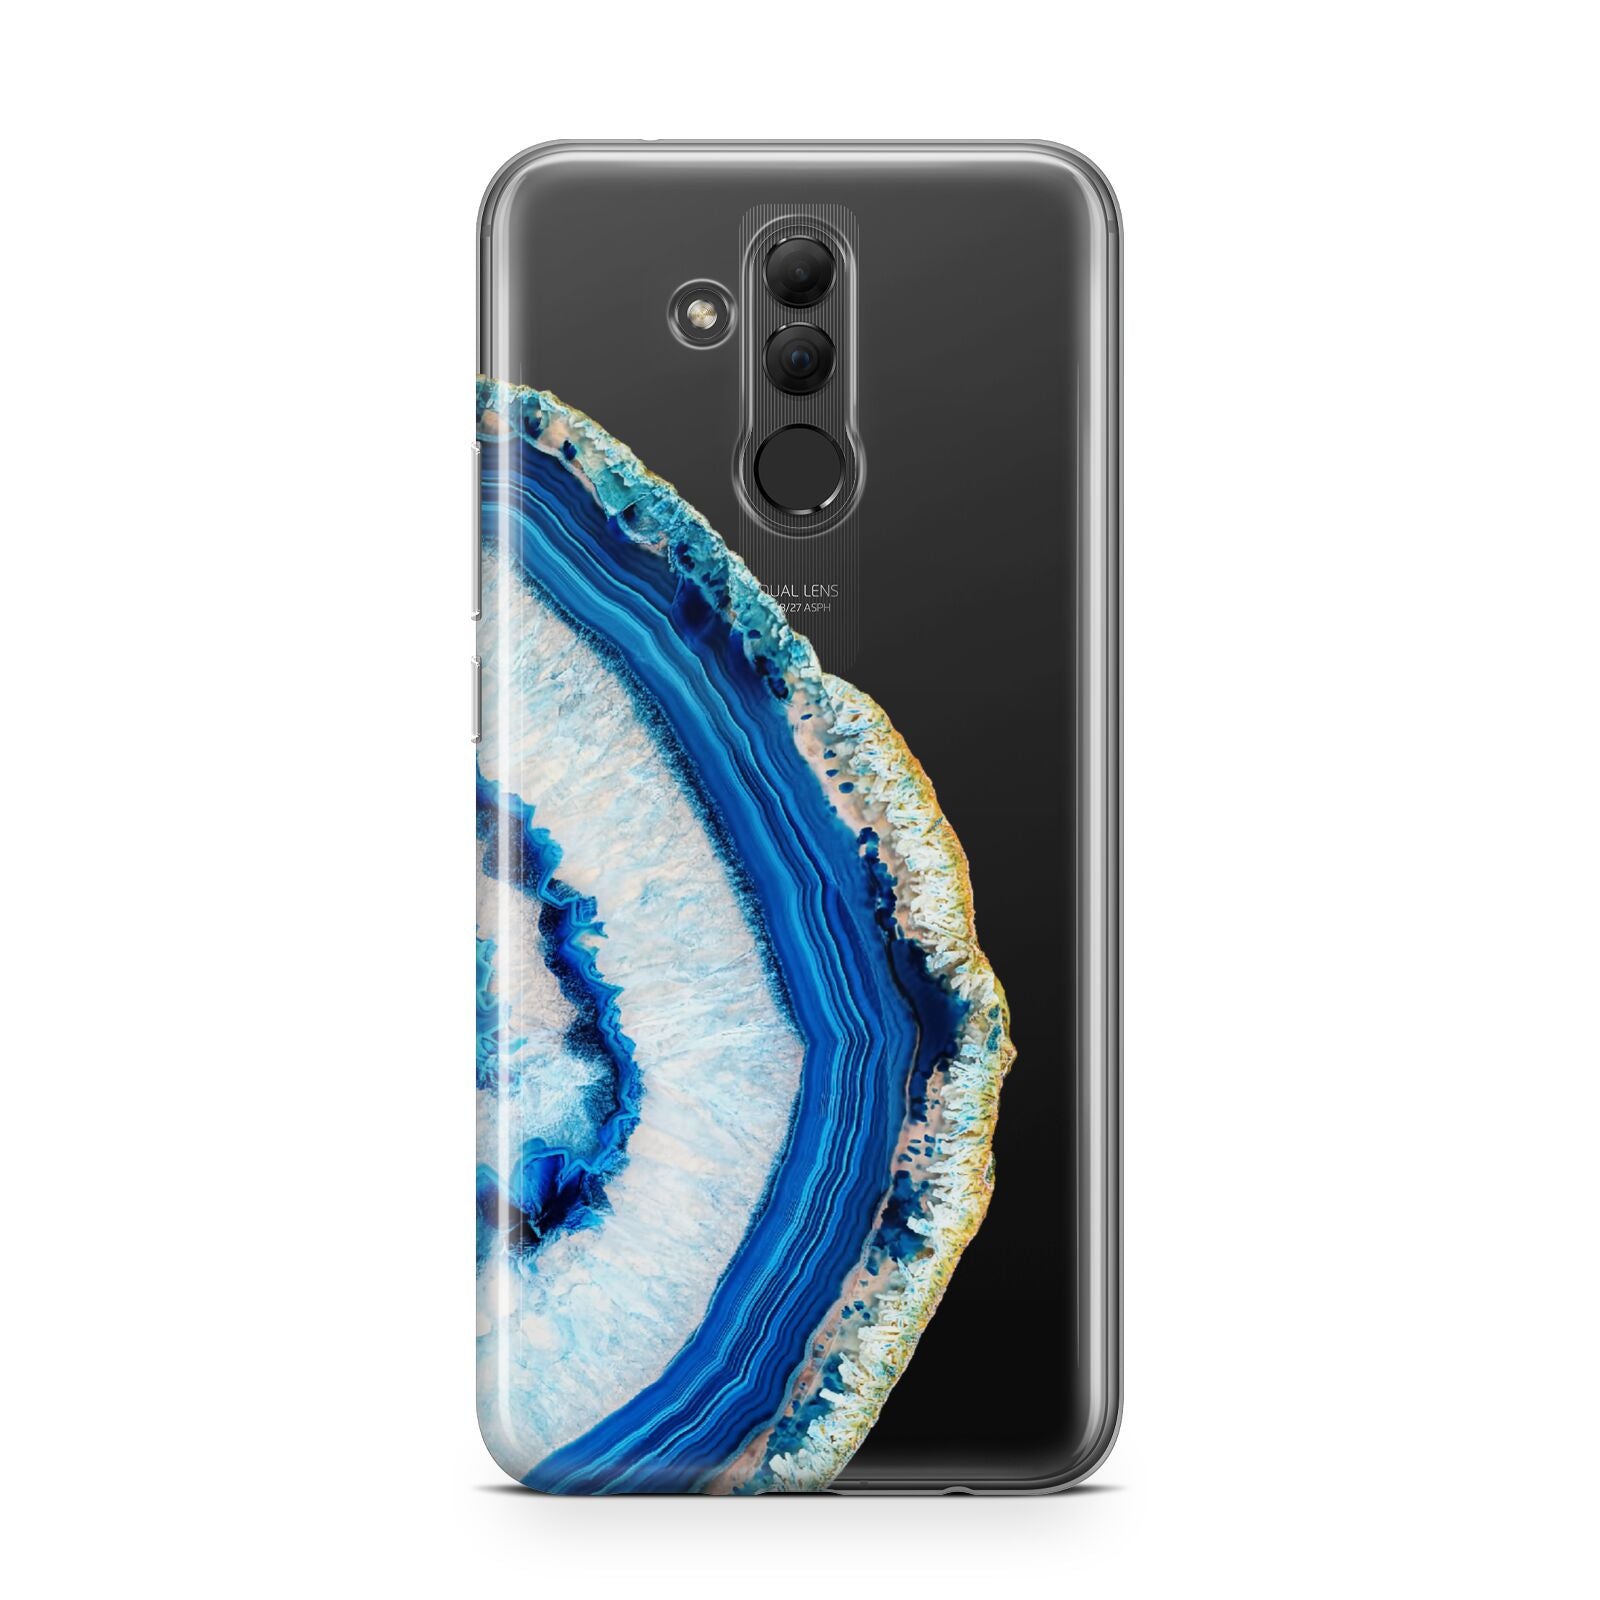 Agate Dark Blue and Turquoise Huawei Mate 20 Lite